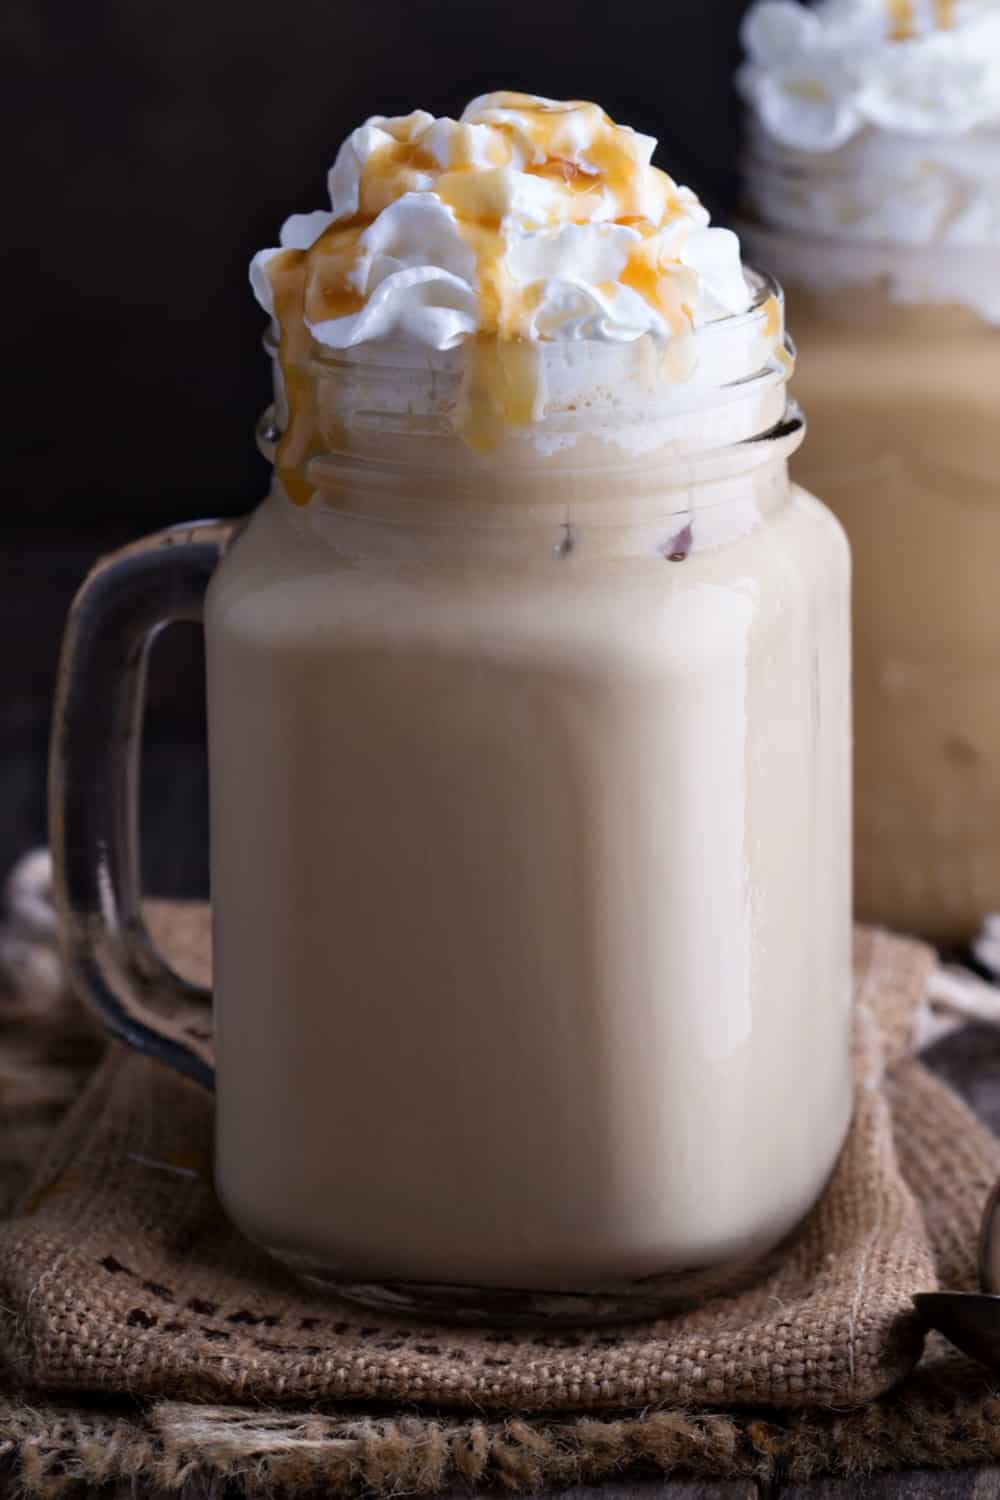 What you will need to for Homemade Starbucks White Chocolate Mocha